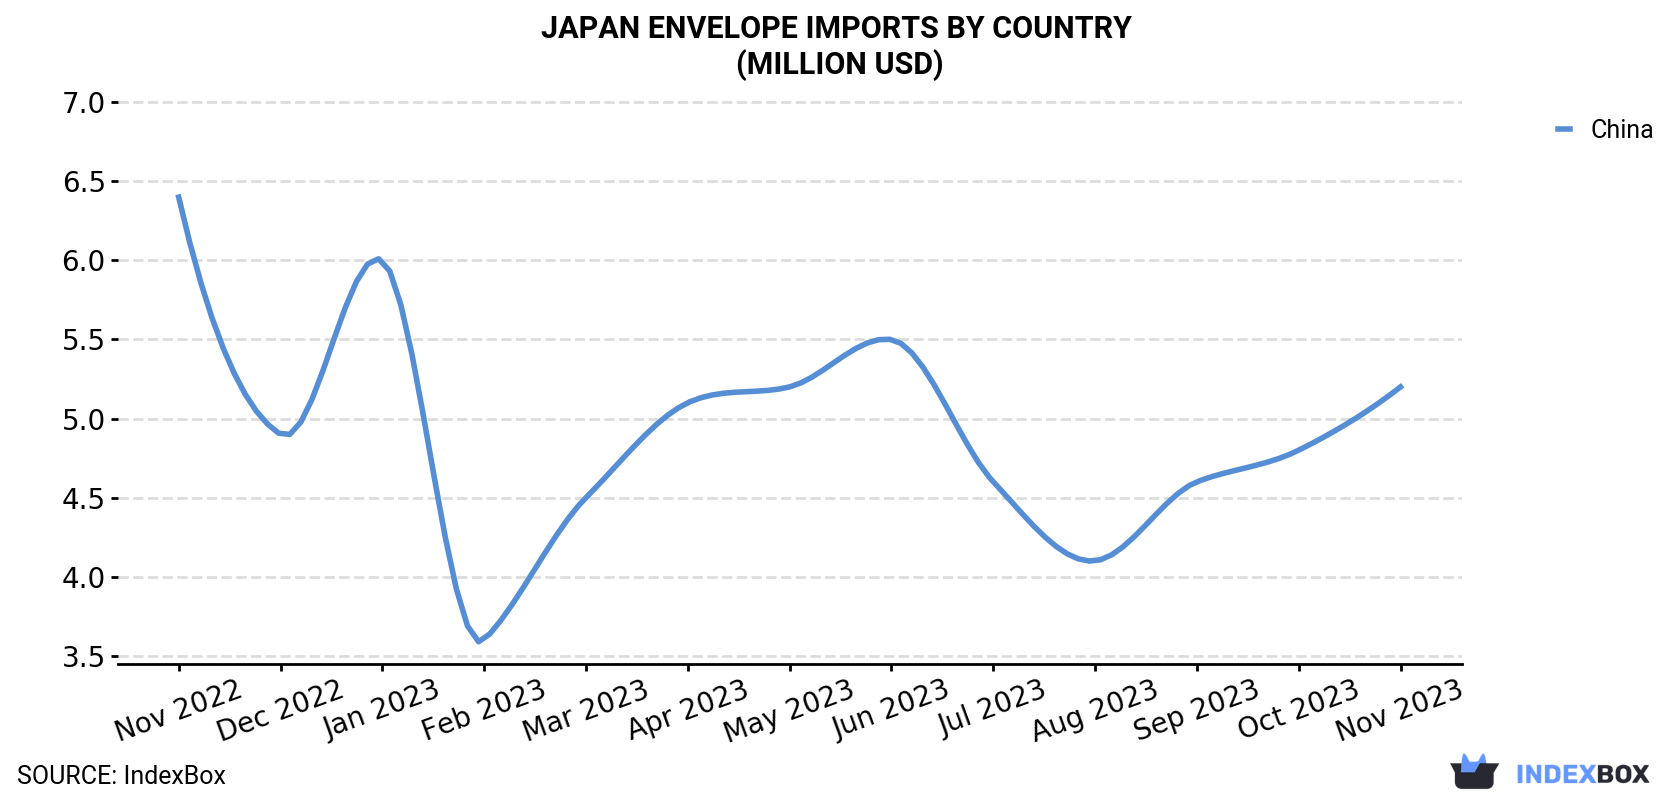 Japan Envelope Imports By Country (Million USD)